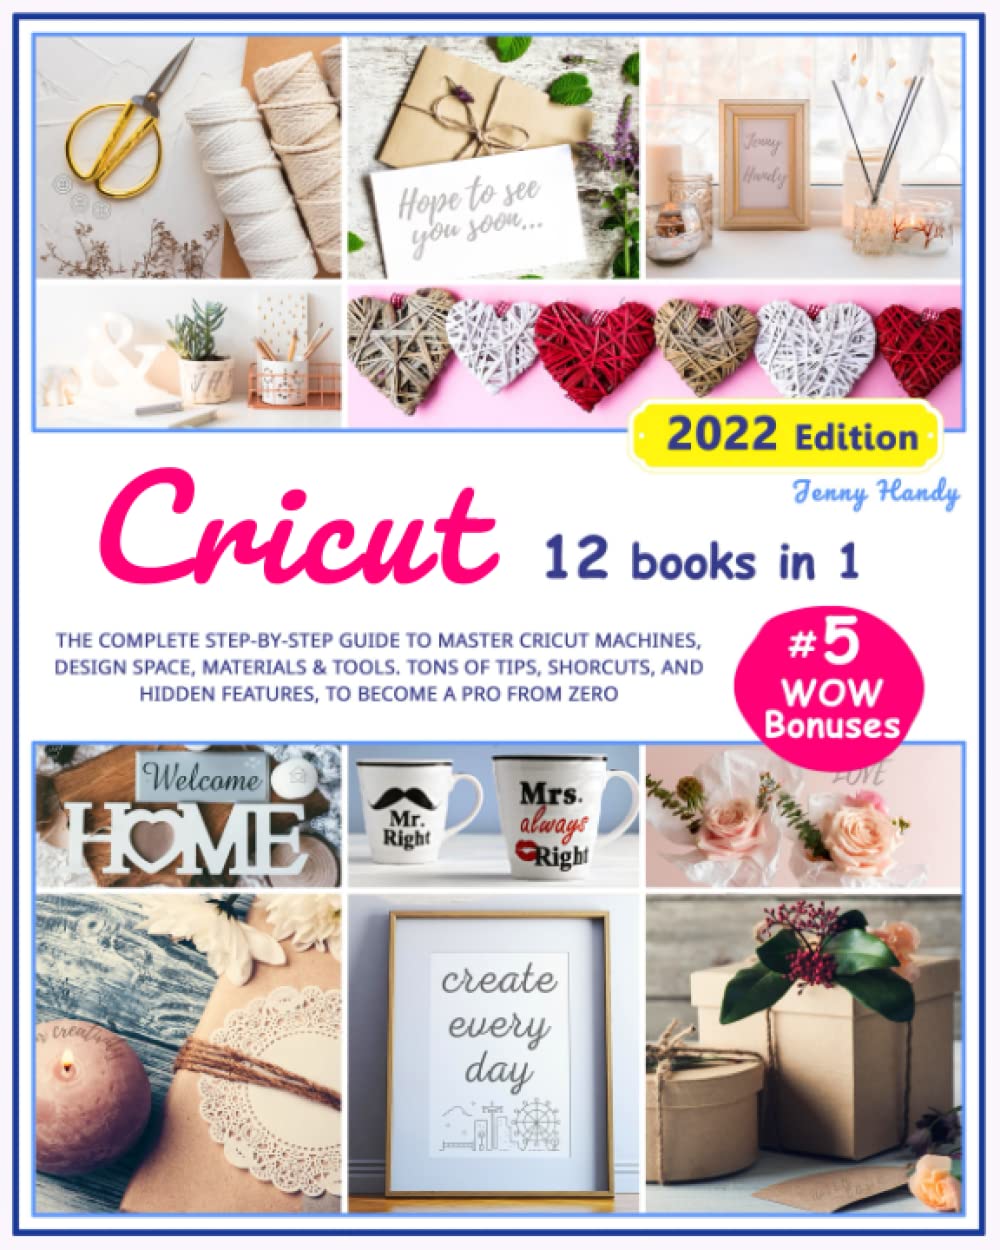 CRICUT: 12 Books in 1. The Complete Step-By-Step Guide to Master Cricut Machines, Design Space, Materials & Tools. Tons of Tips, Shortcuts, Secret Hacks, and WOW Bonuses to Become a Pro from Zero